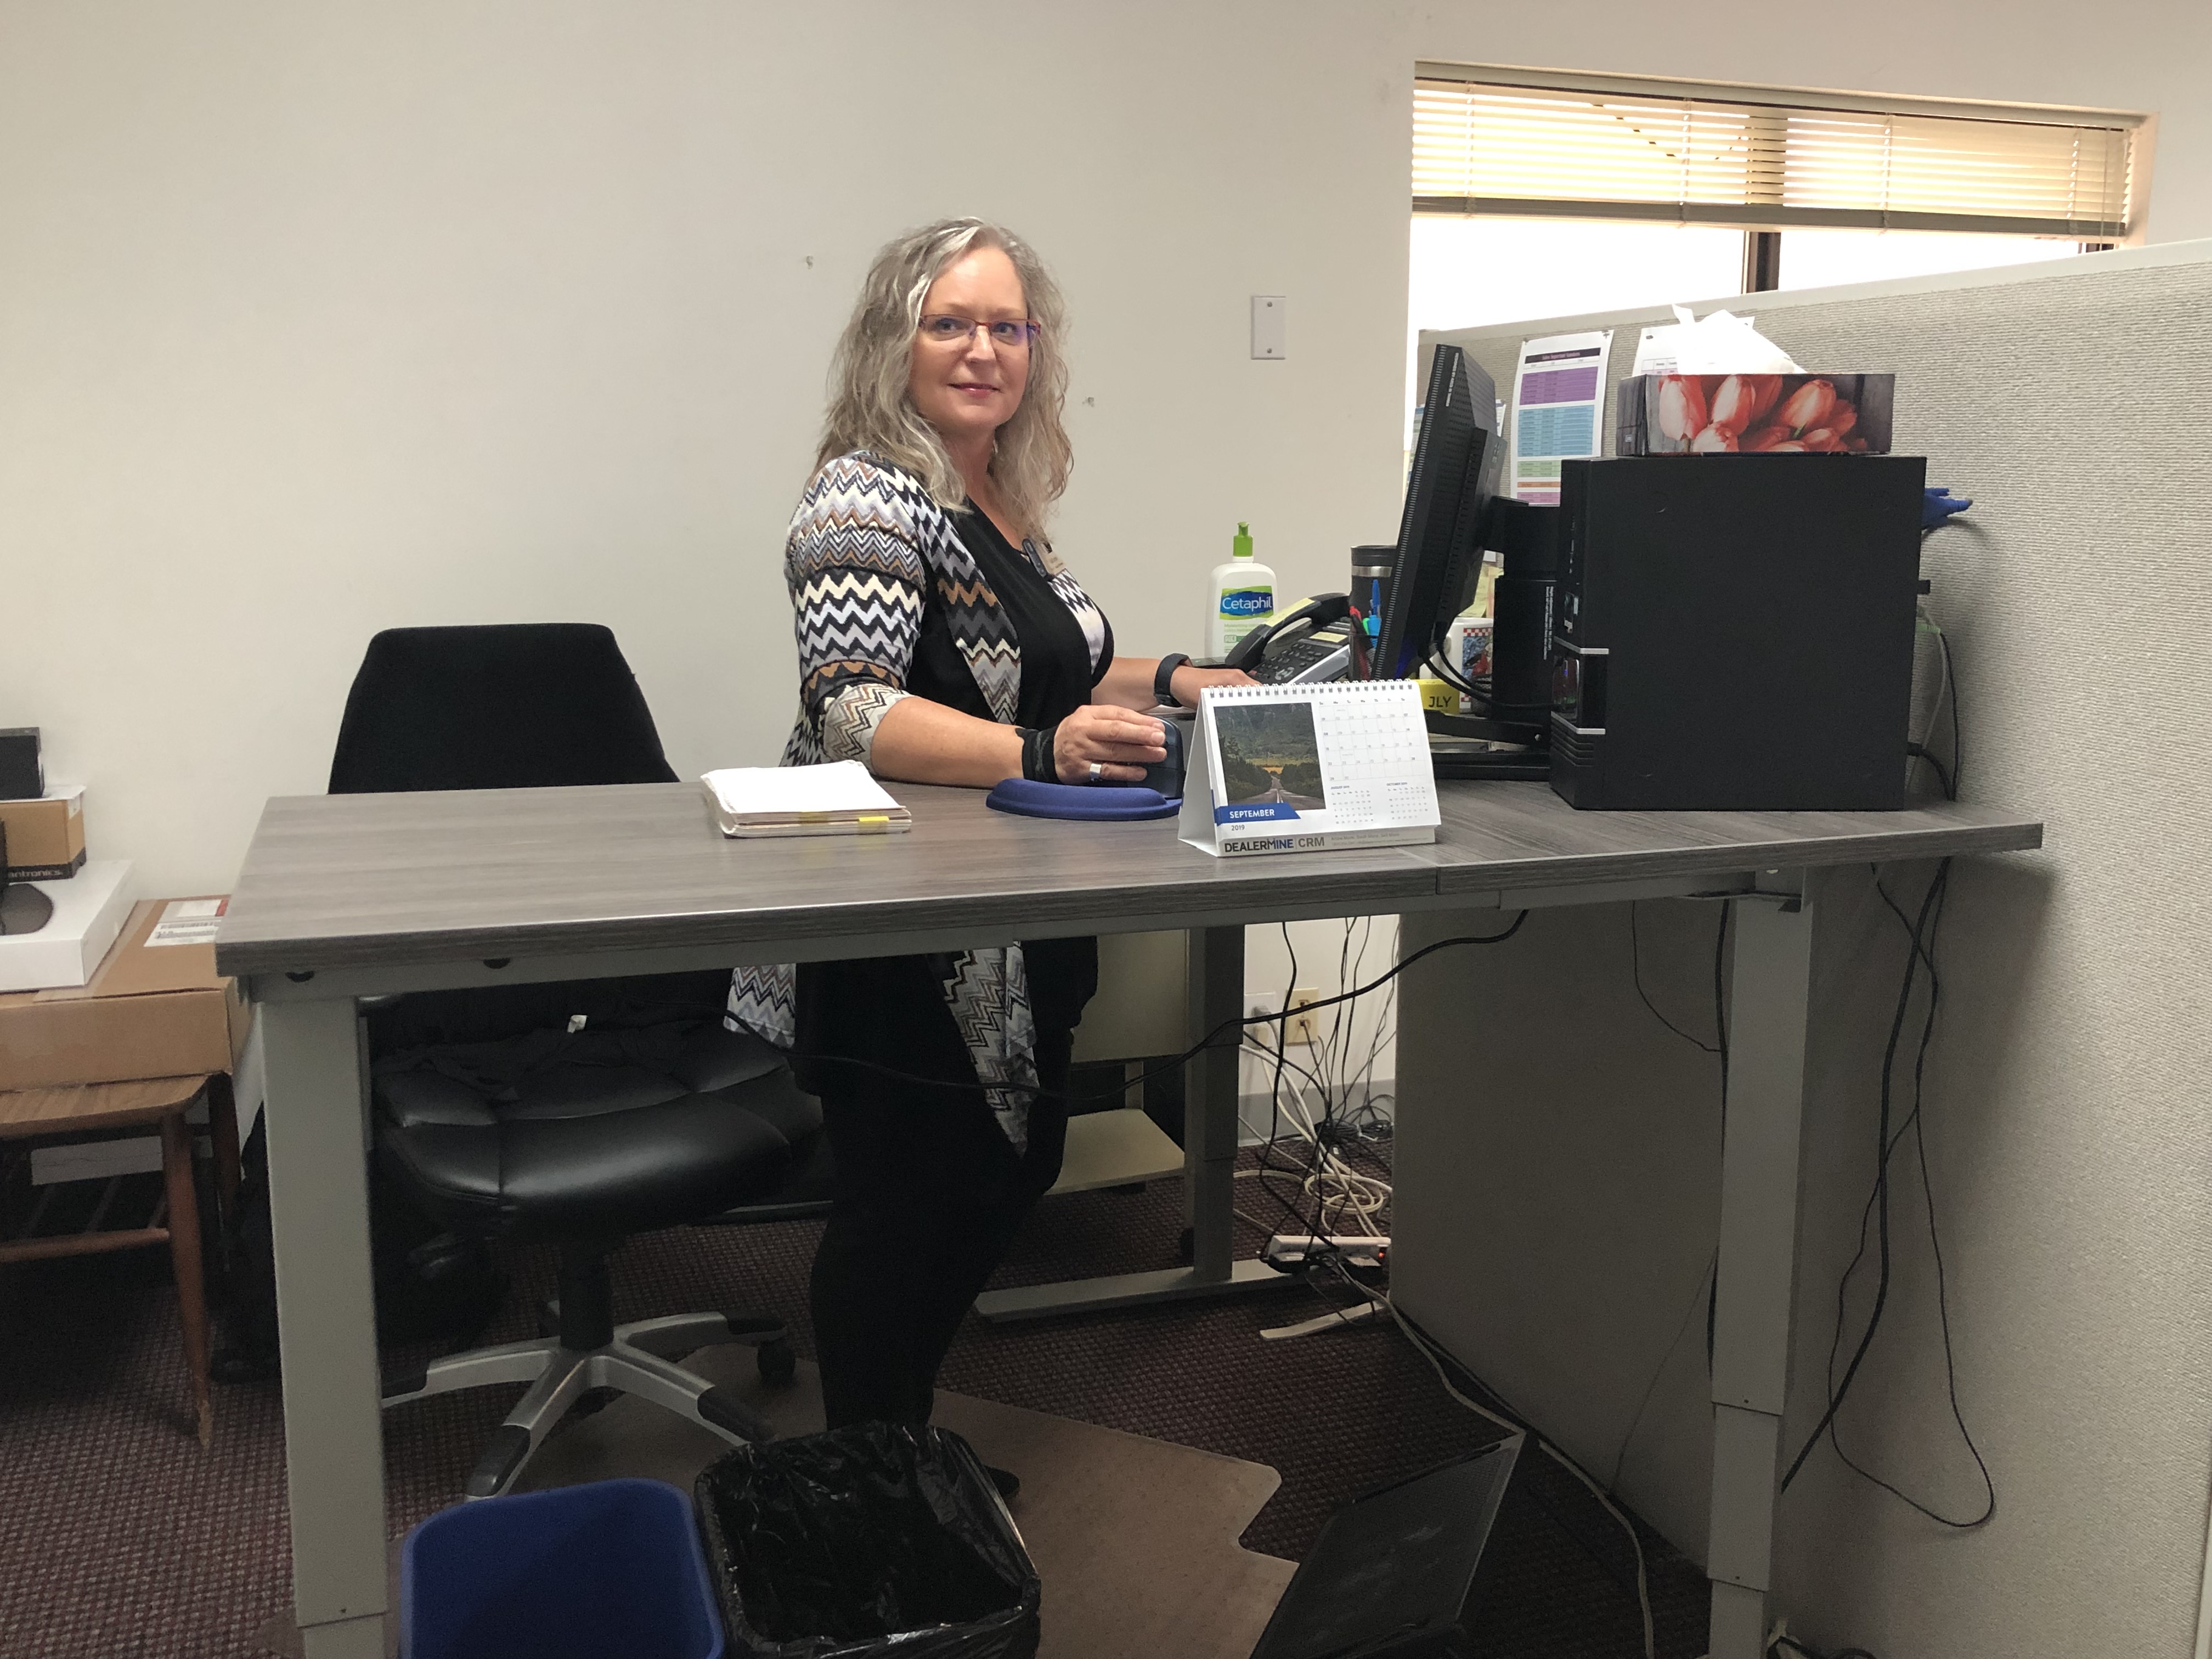 Gail at her sit-stand desk